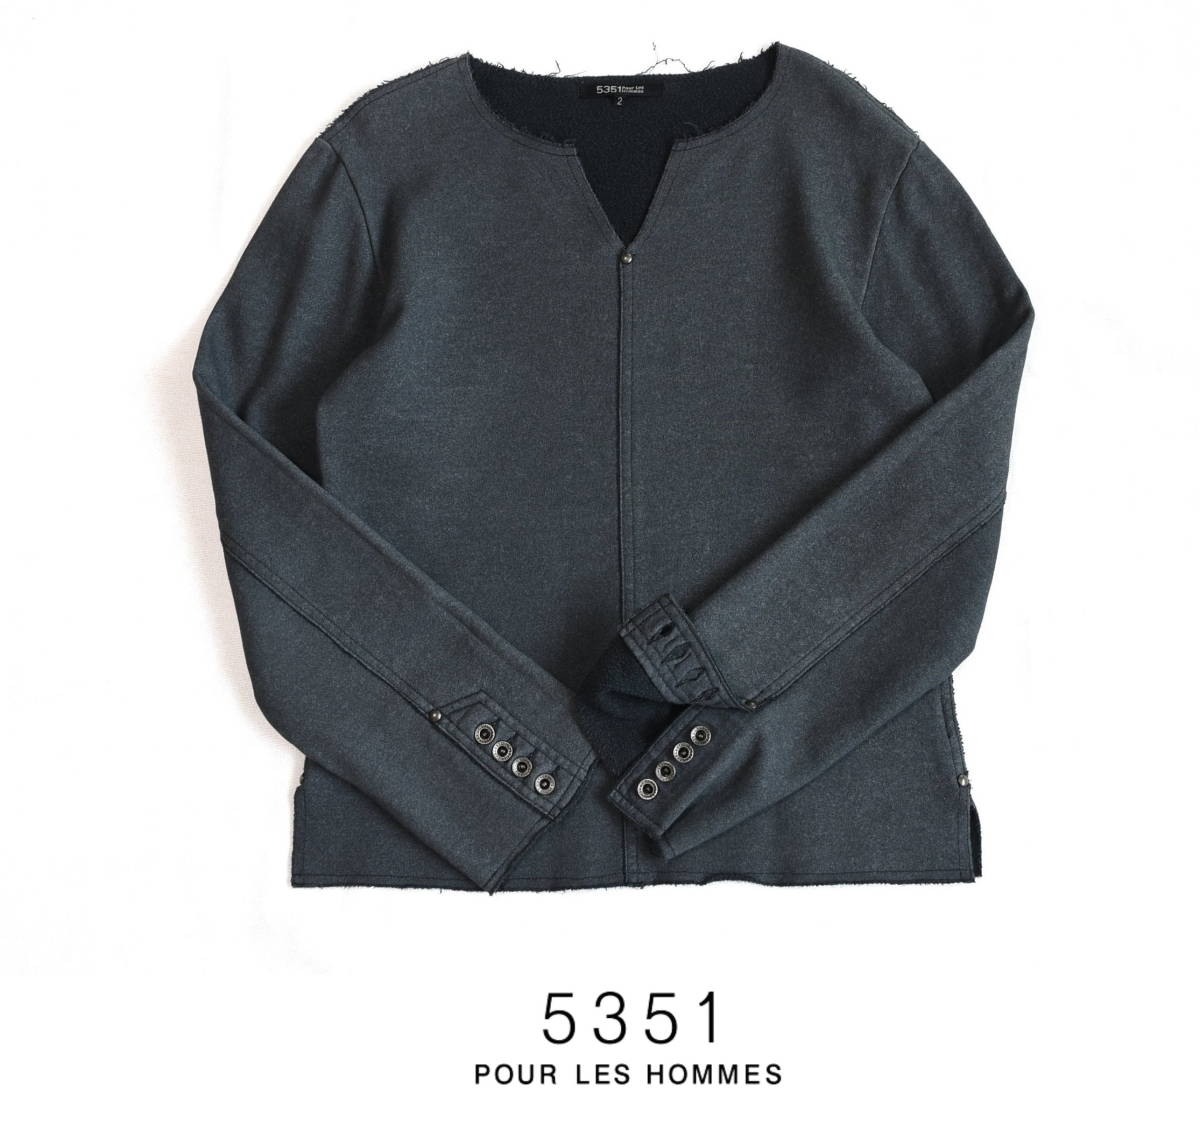 5351POUR LES HOMMES（5351プールオム）袖ボタン付き・コーティング加工スウェット size2 日本製 MADE IN JAPAN.